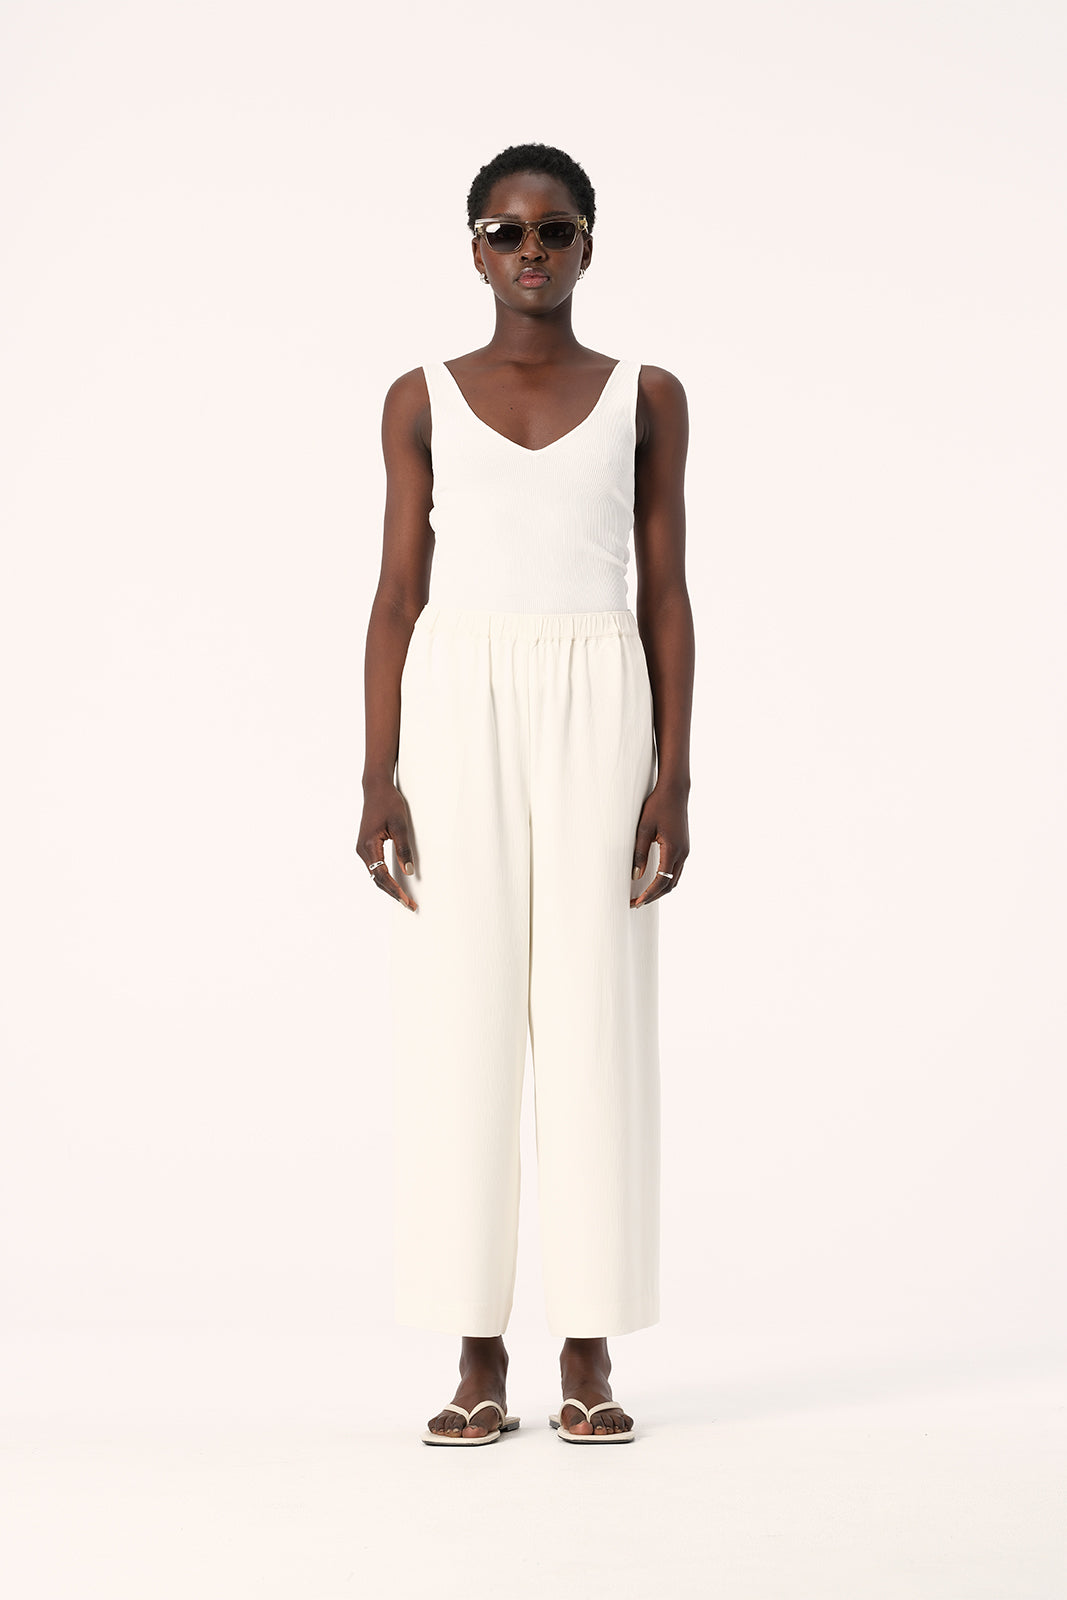 Perry V-Neck Knit Singlet Top in White | Elka Collective